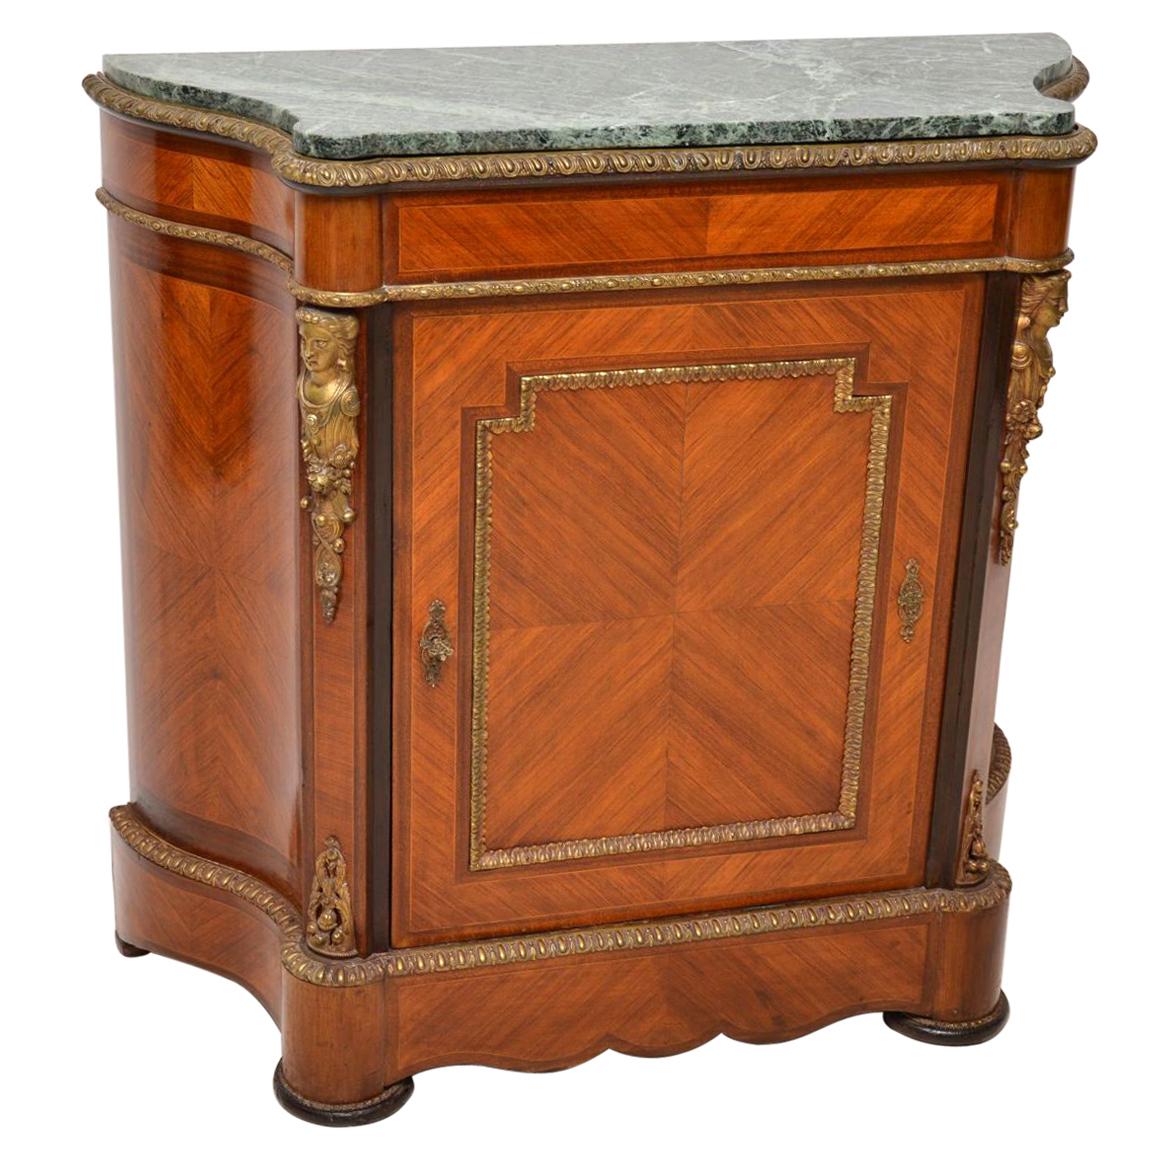 Antique French Marble Top Cabinet